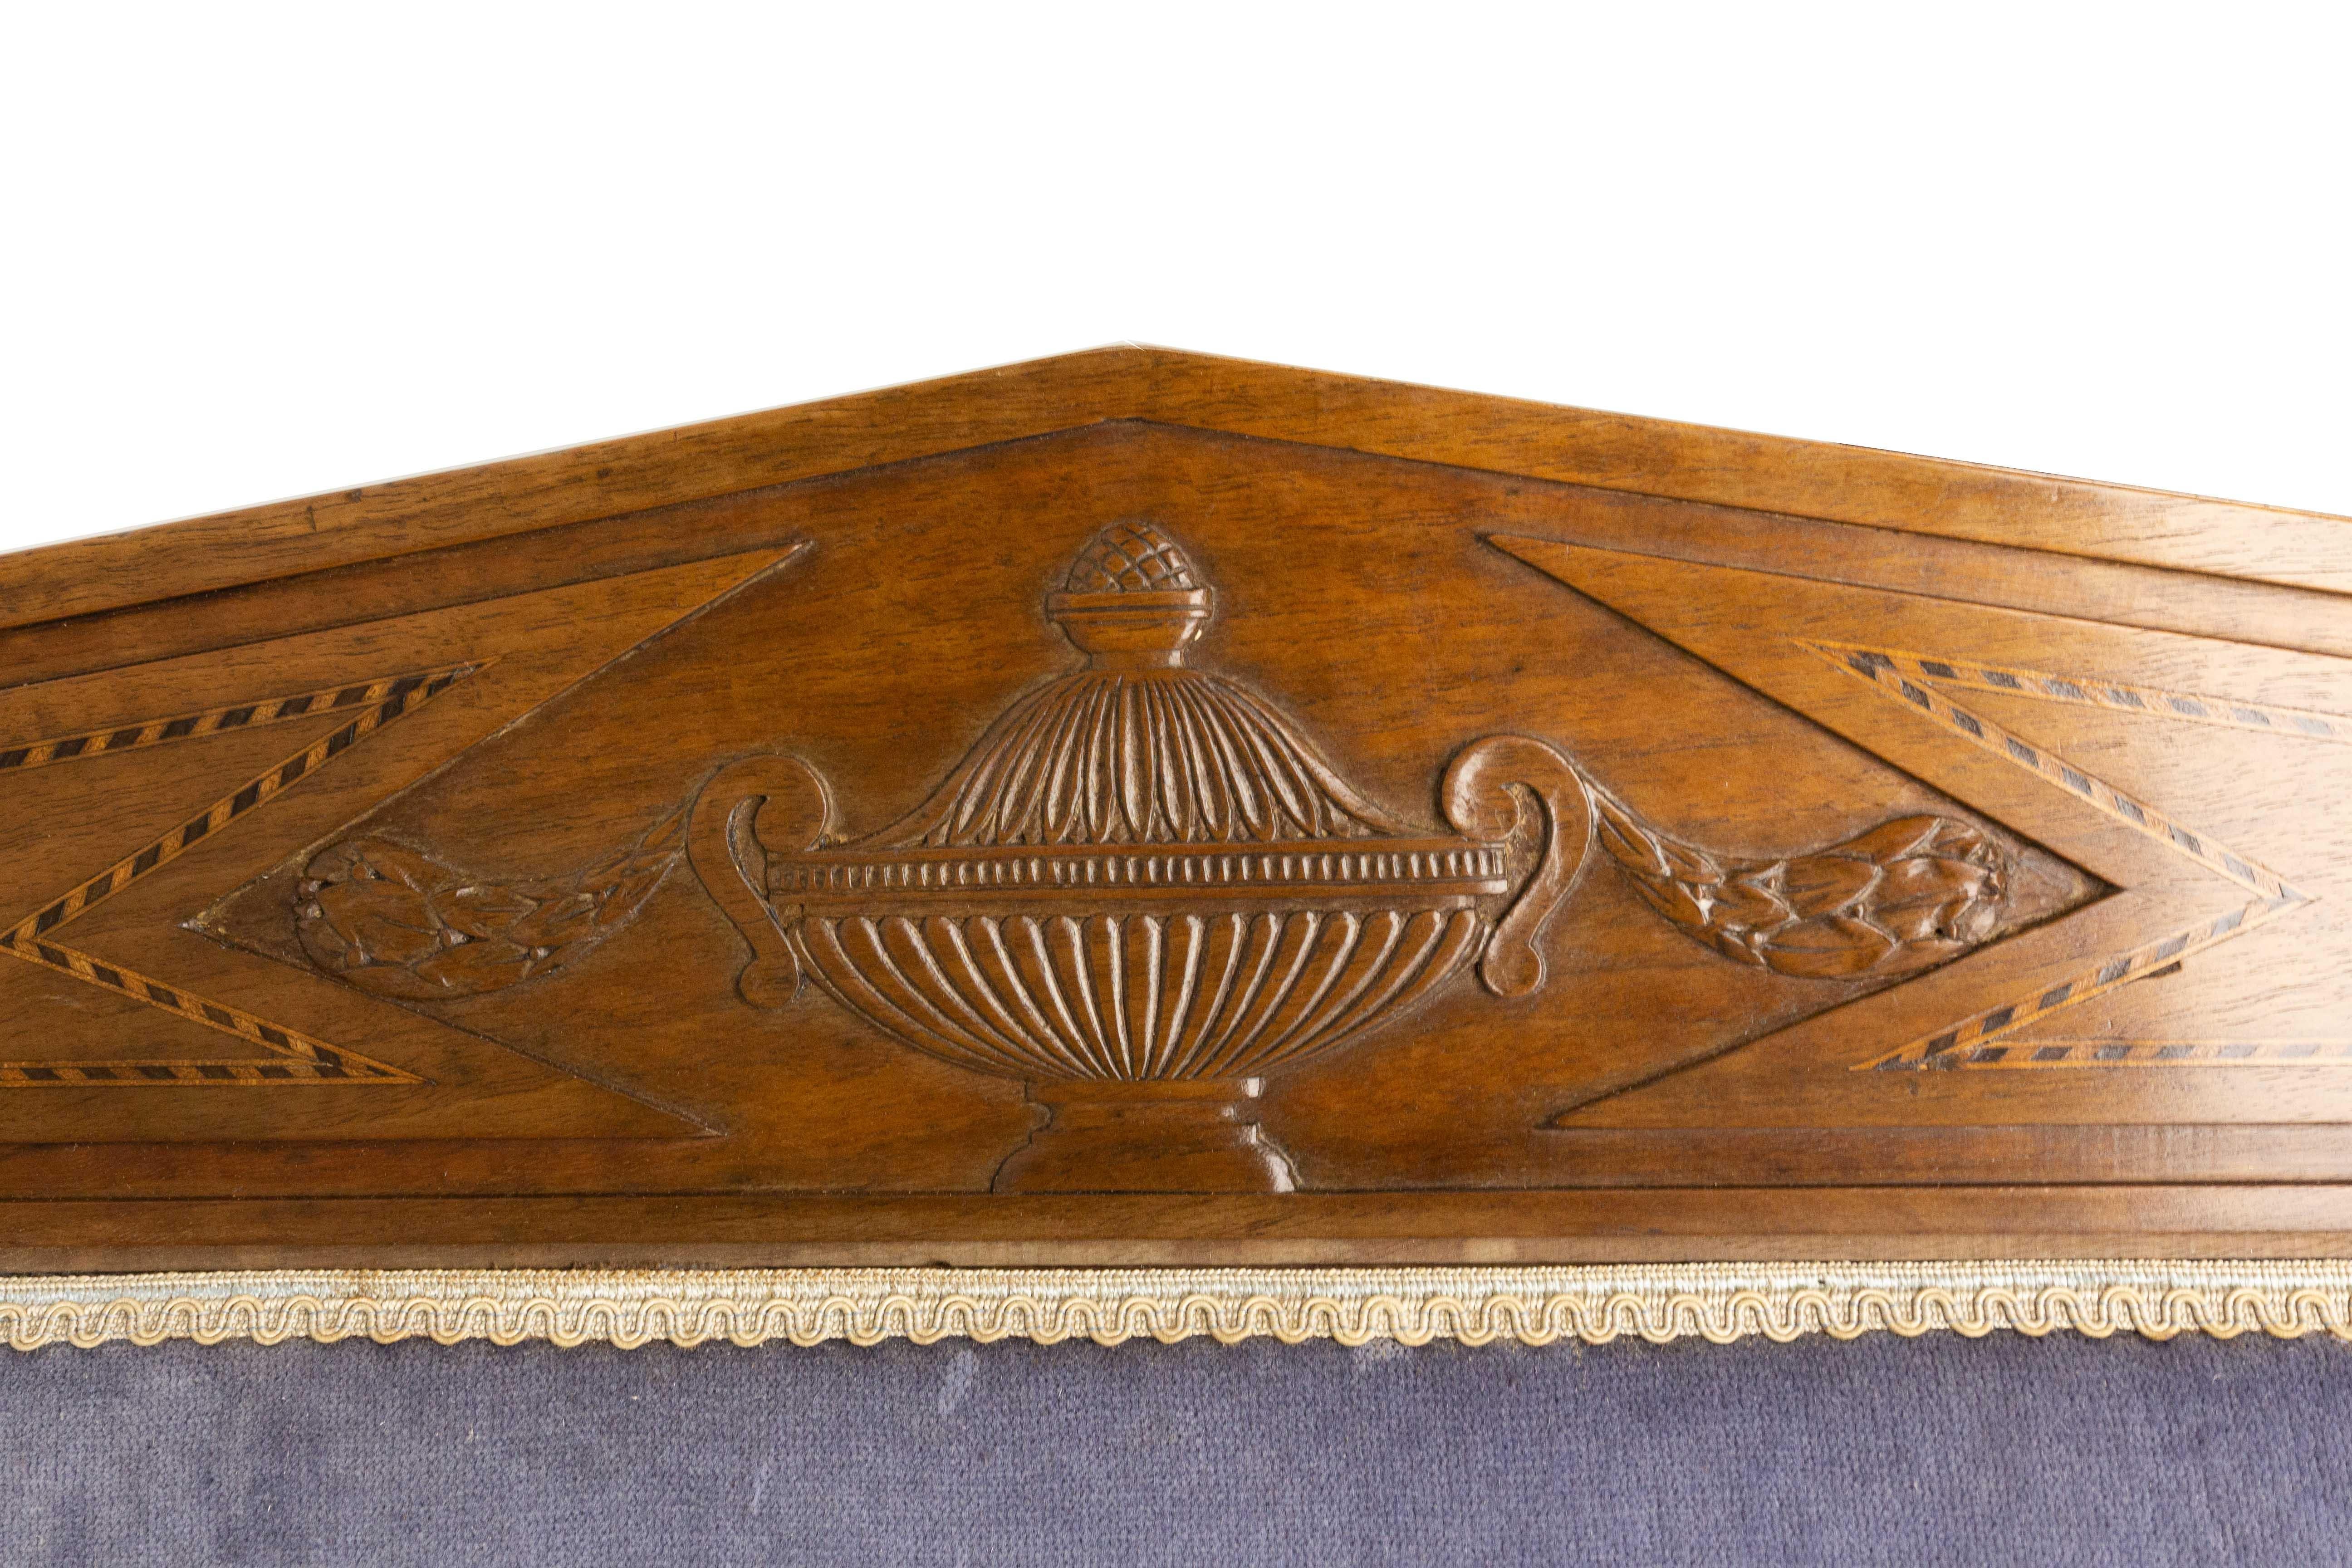 French Directoire walnut Sofa Banquette Carved and Inlayed, Early 19th Century For Sale 3